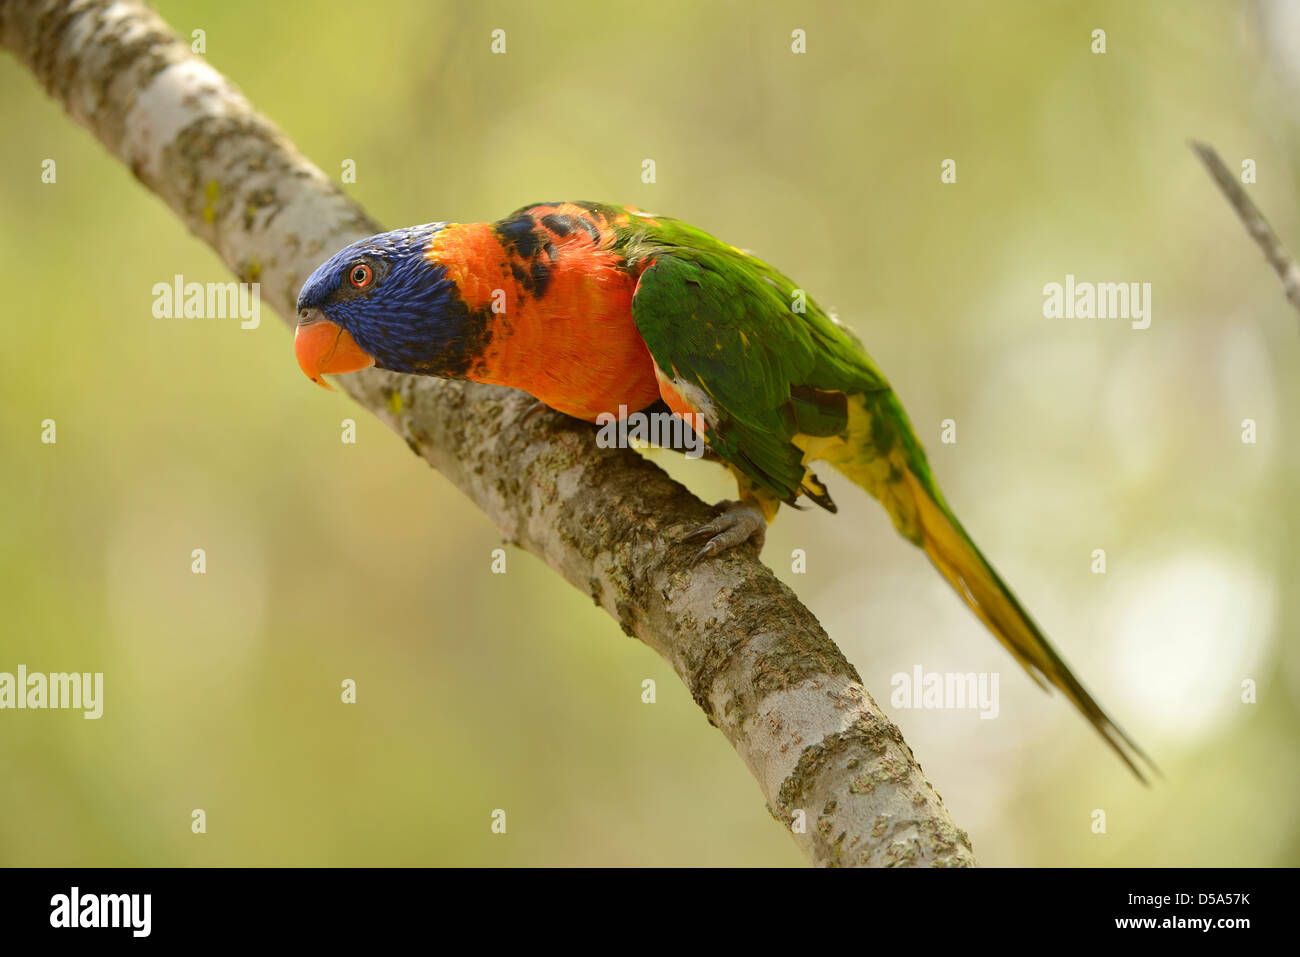 Red-collared Lorikeet (Trichoglossus rubritorquis) perched on tree branch, Queensland, Australia, November Stock Photo